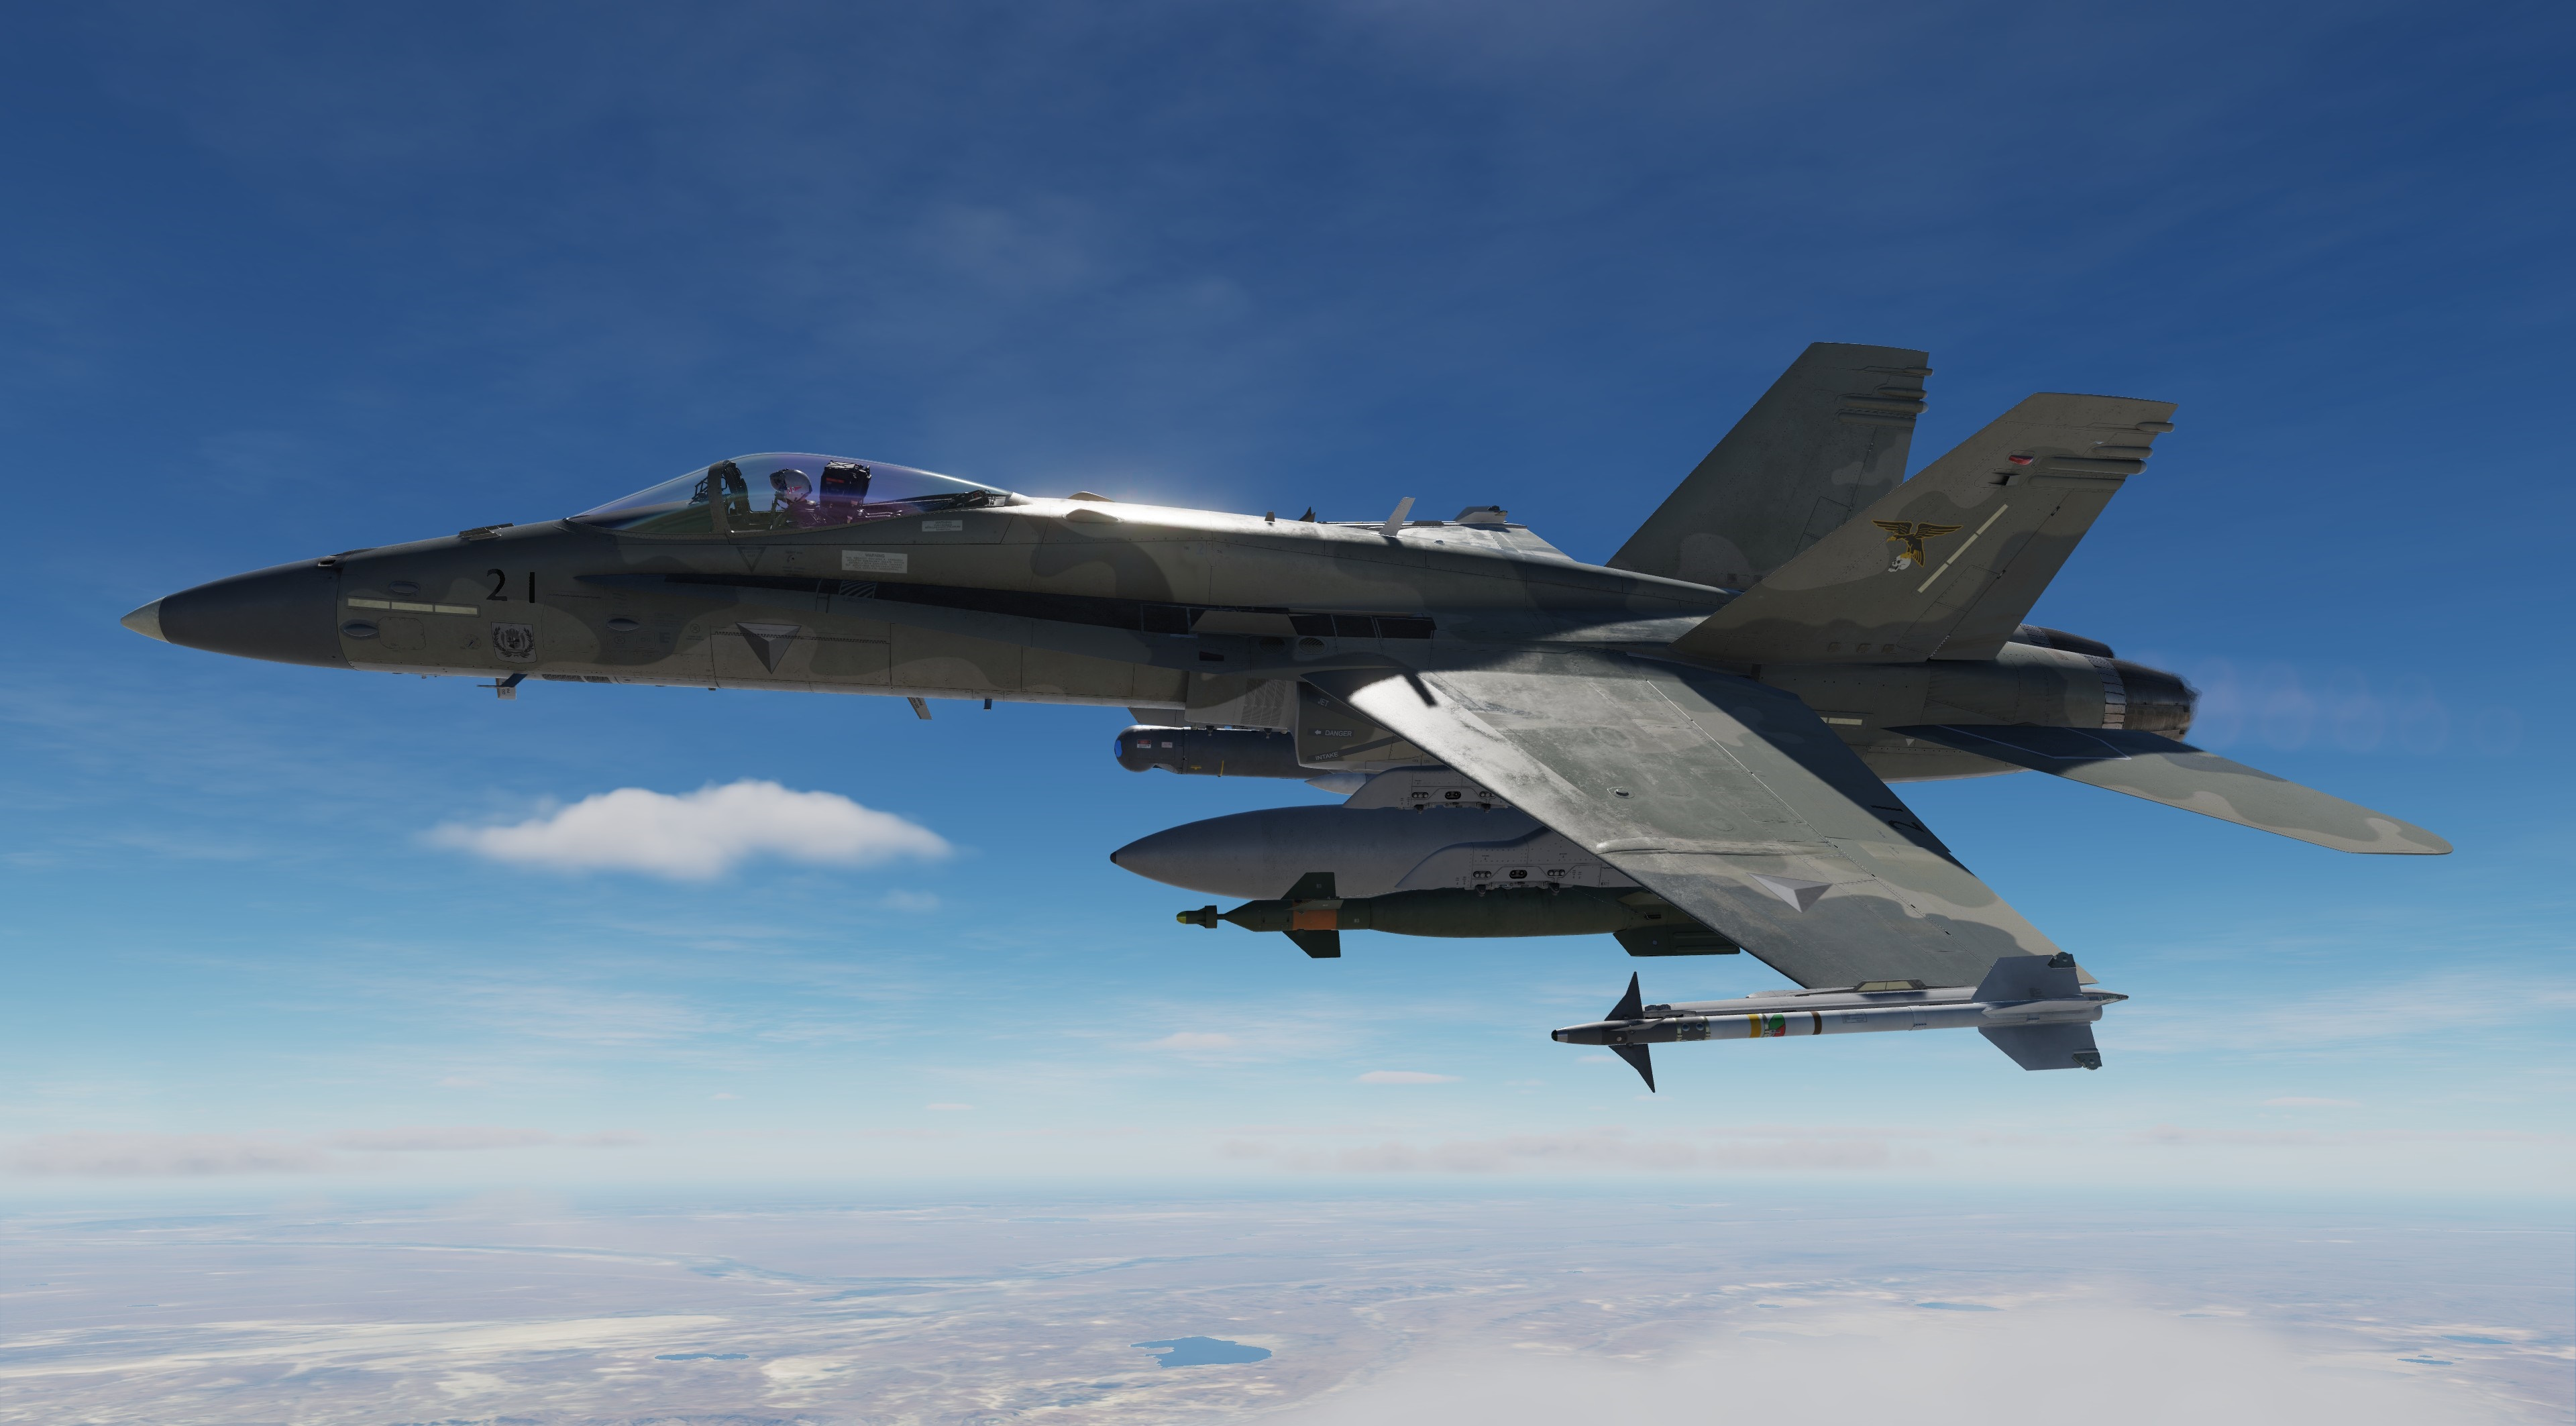 ACE COMBAT - F-18C - Nordennavic Royal Air Force - Sqn "Vosges" V1.1 SPA 91 only